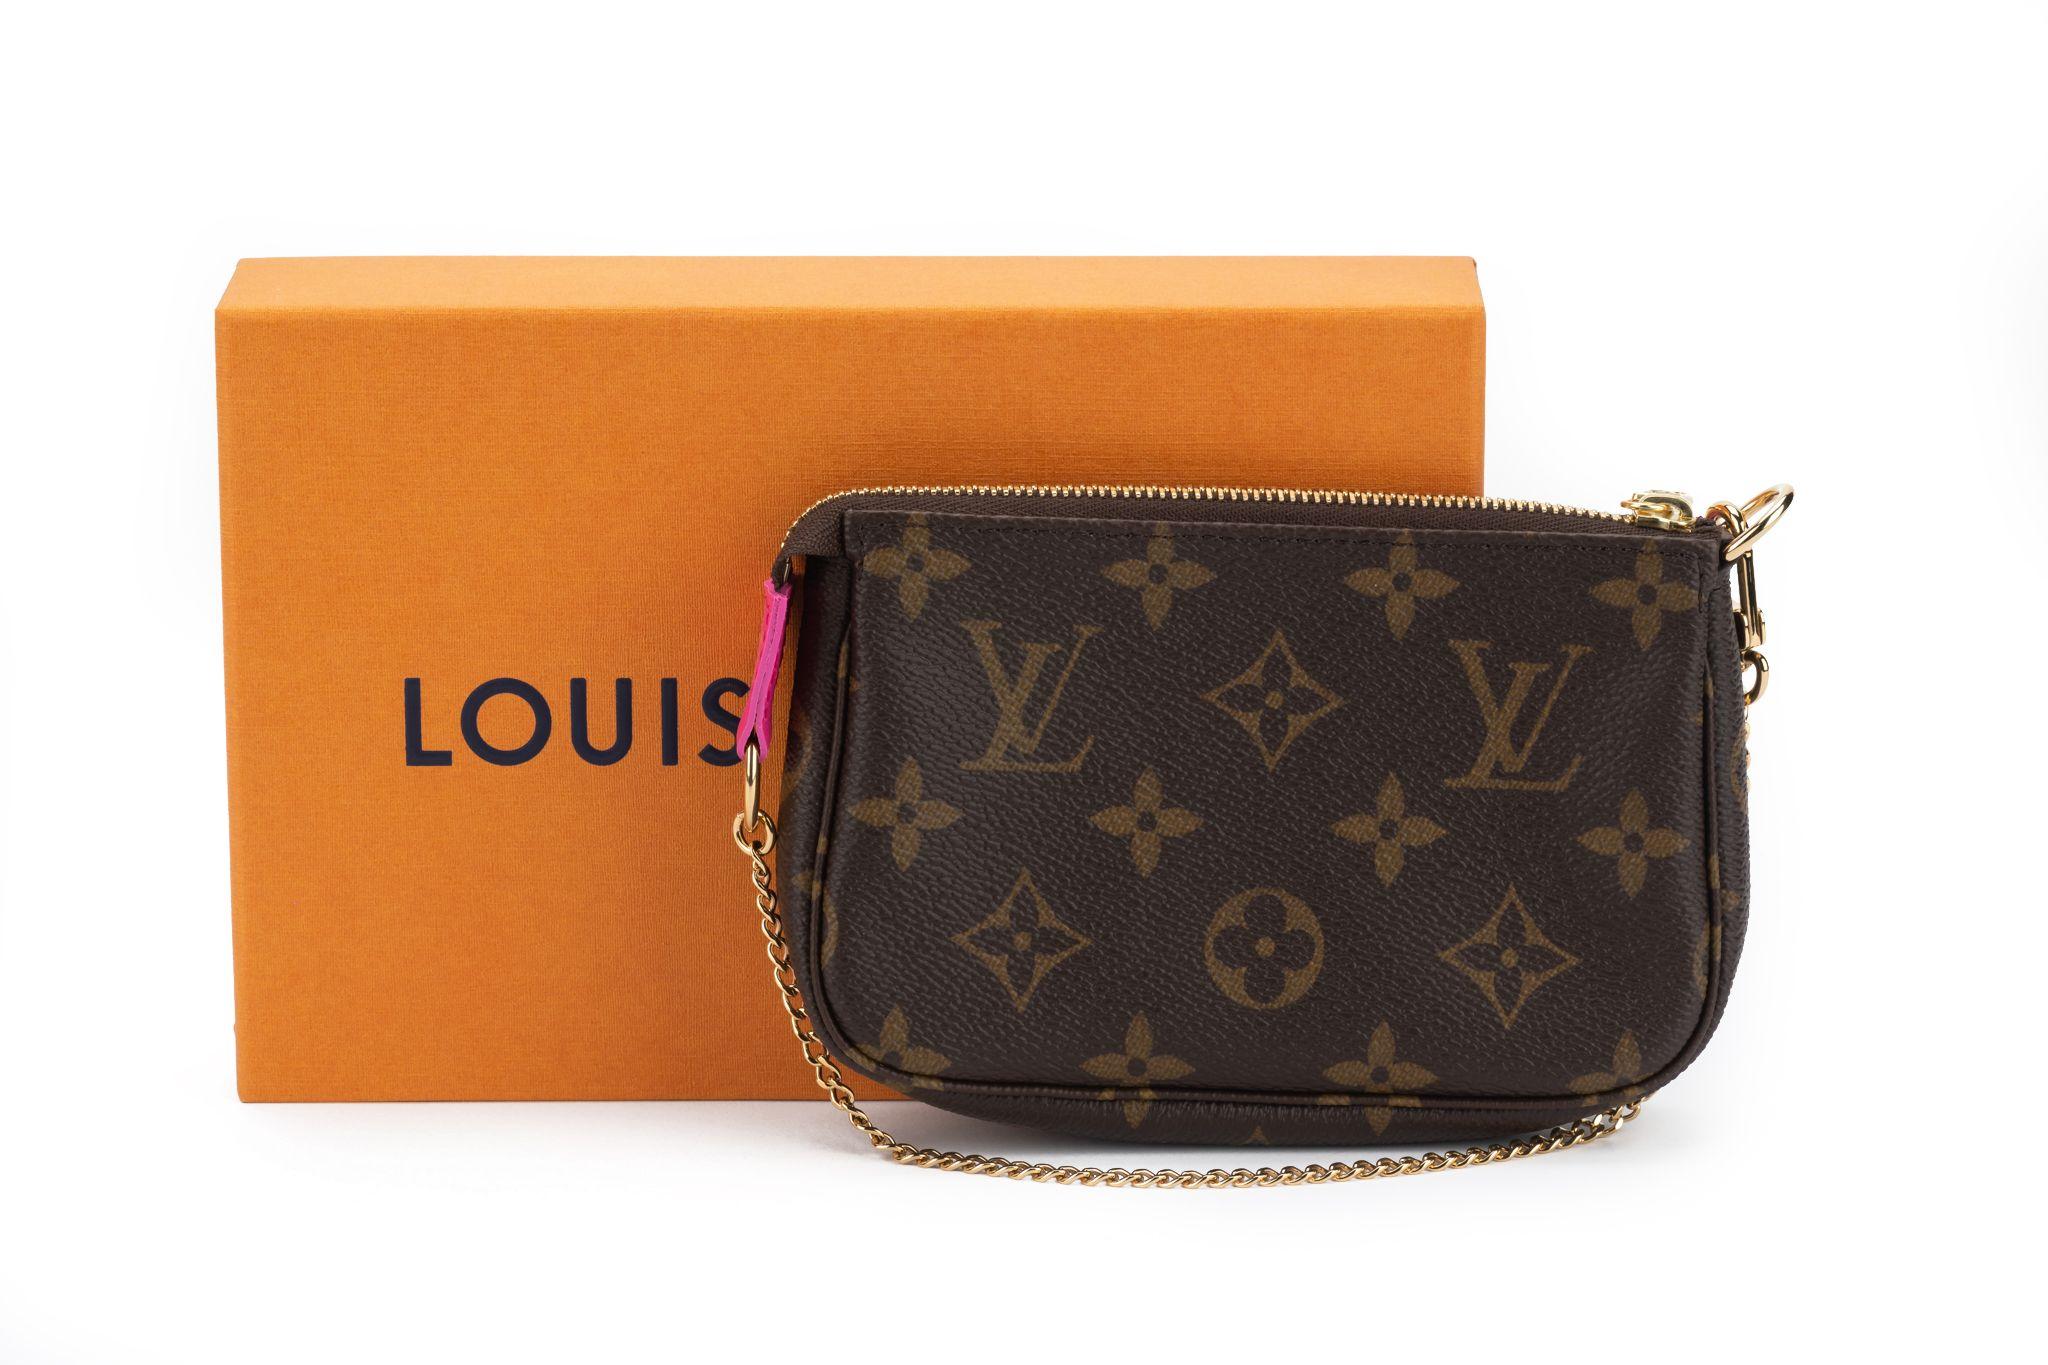 Louis Vuitton Mini Pochette Accessoires belongs to the Vivienne Holidays 2022 collection. It's brand new and comes with the original dustcover and box.